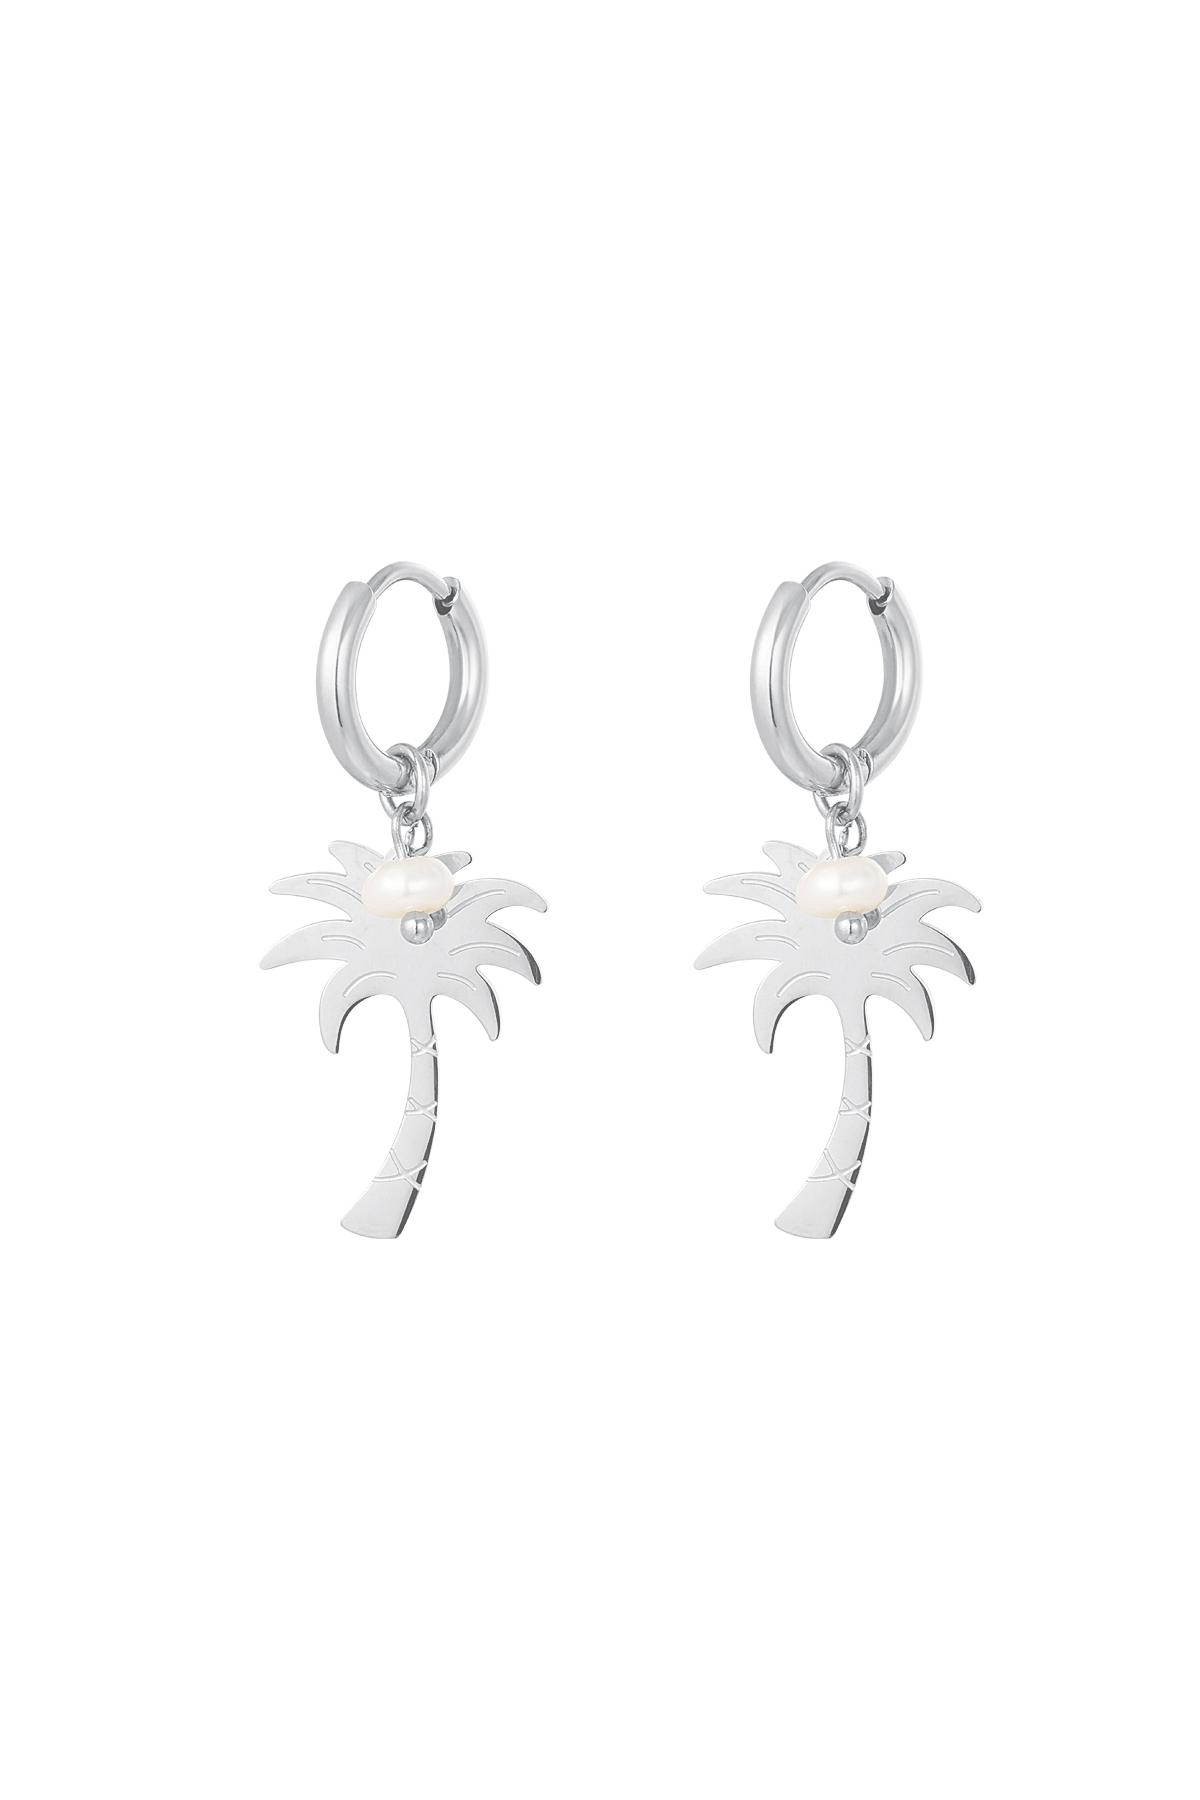 Palm tree earrings - Beach collection Silver Stainless Steel h5 